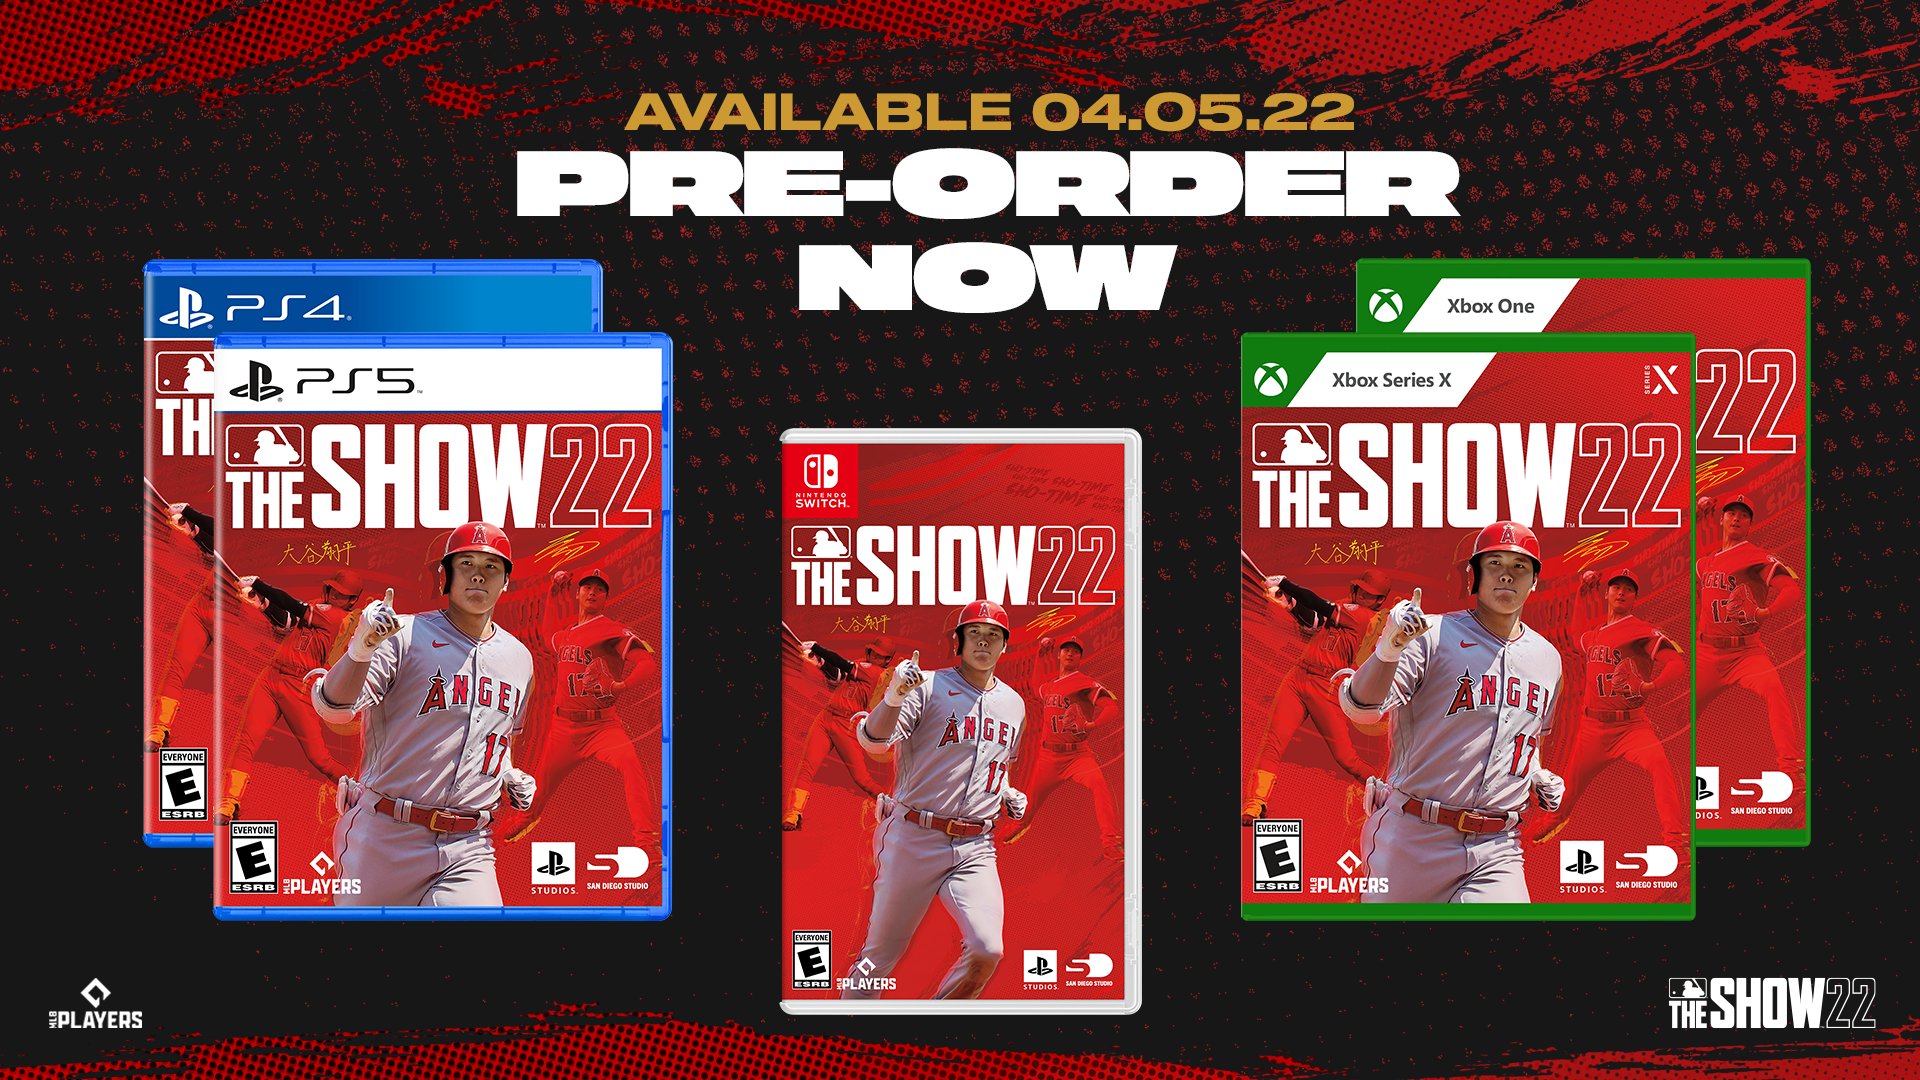 MLB The Show 22 coming to Nintendo Switch in April